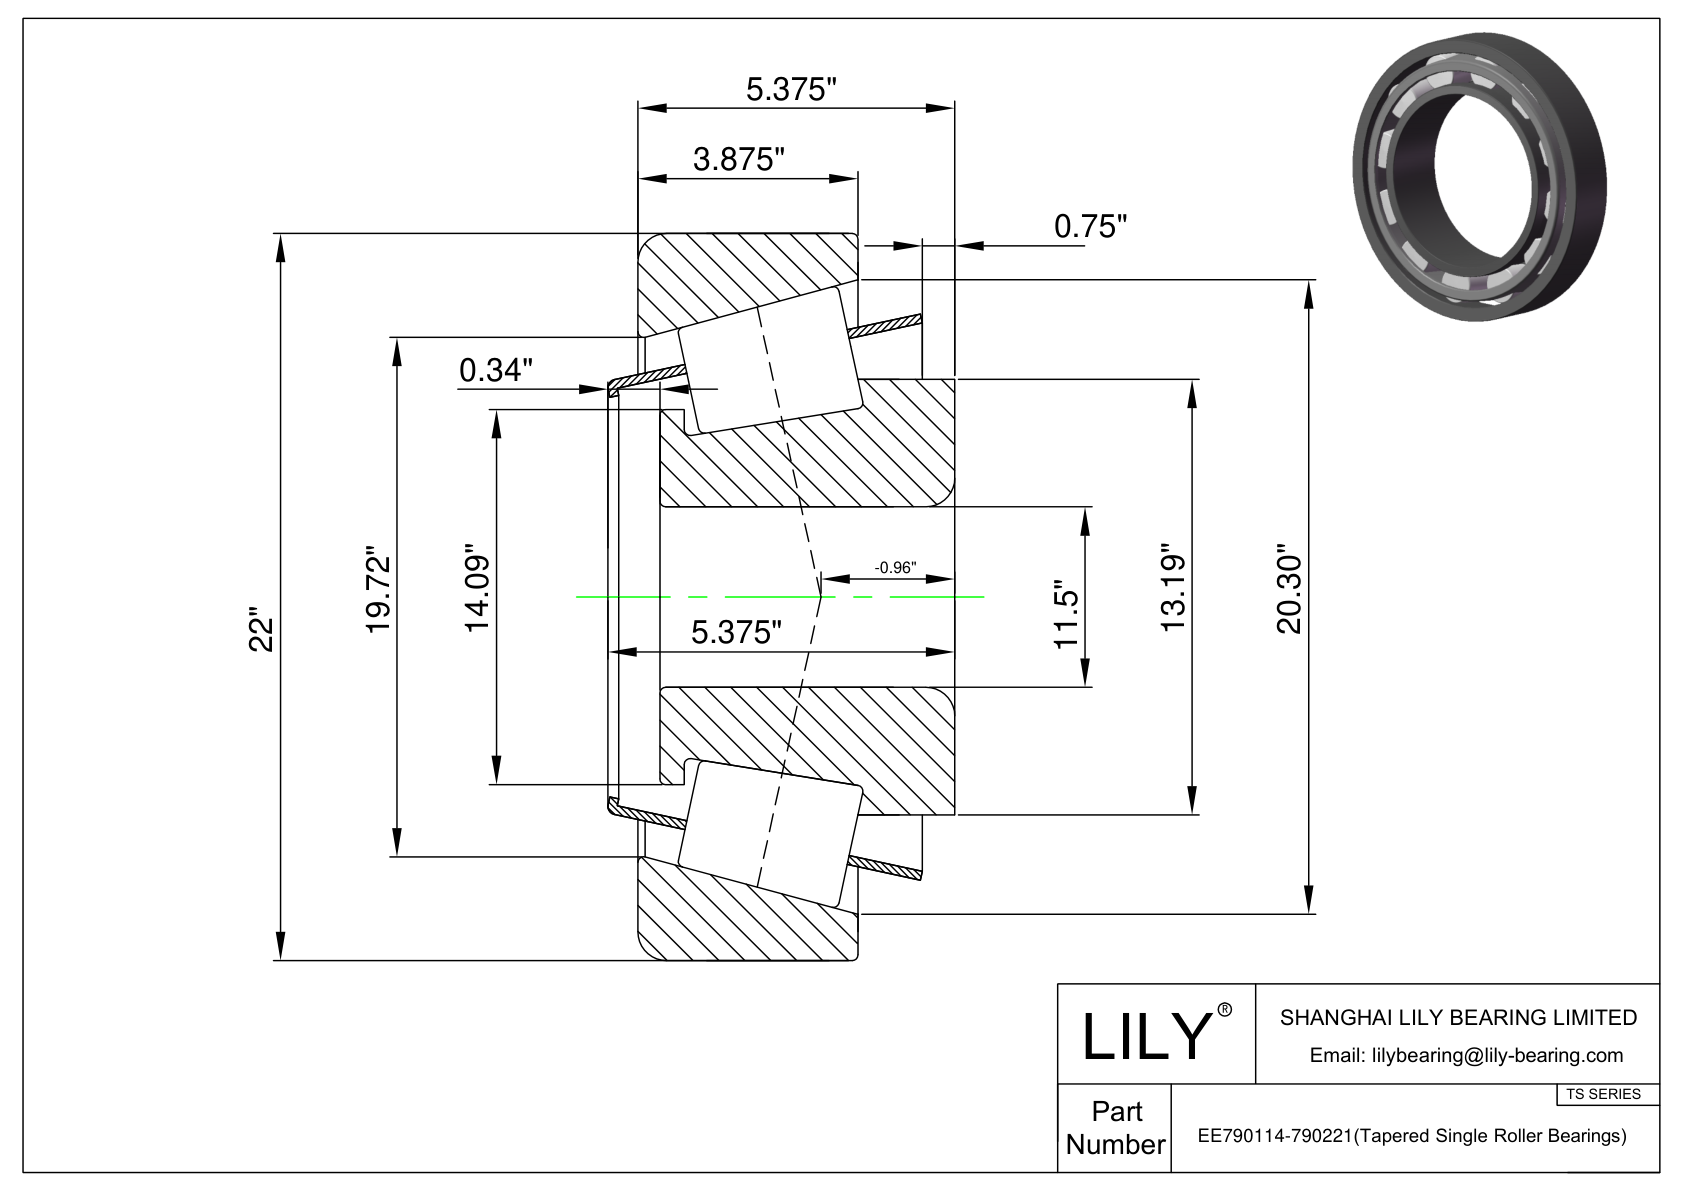 EE790114-790221 TS (Tapered Single Roller Bearings) (Imperial) cad drawing